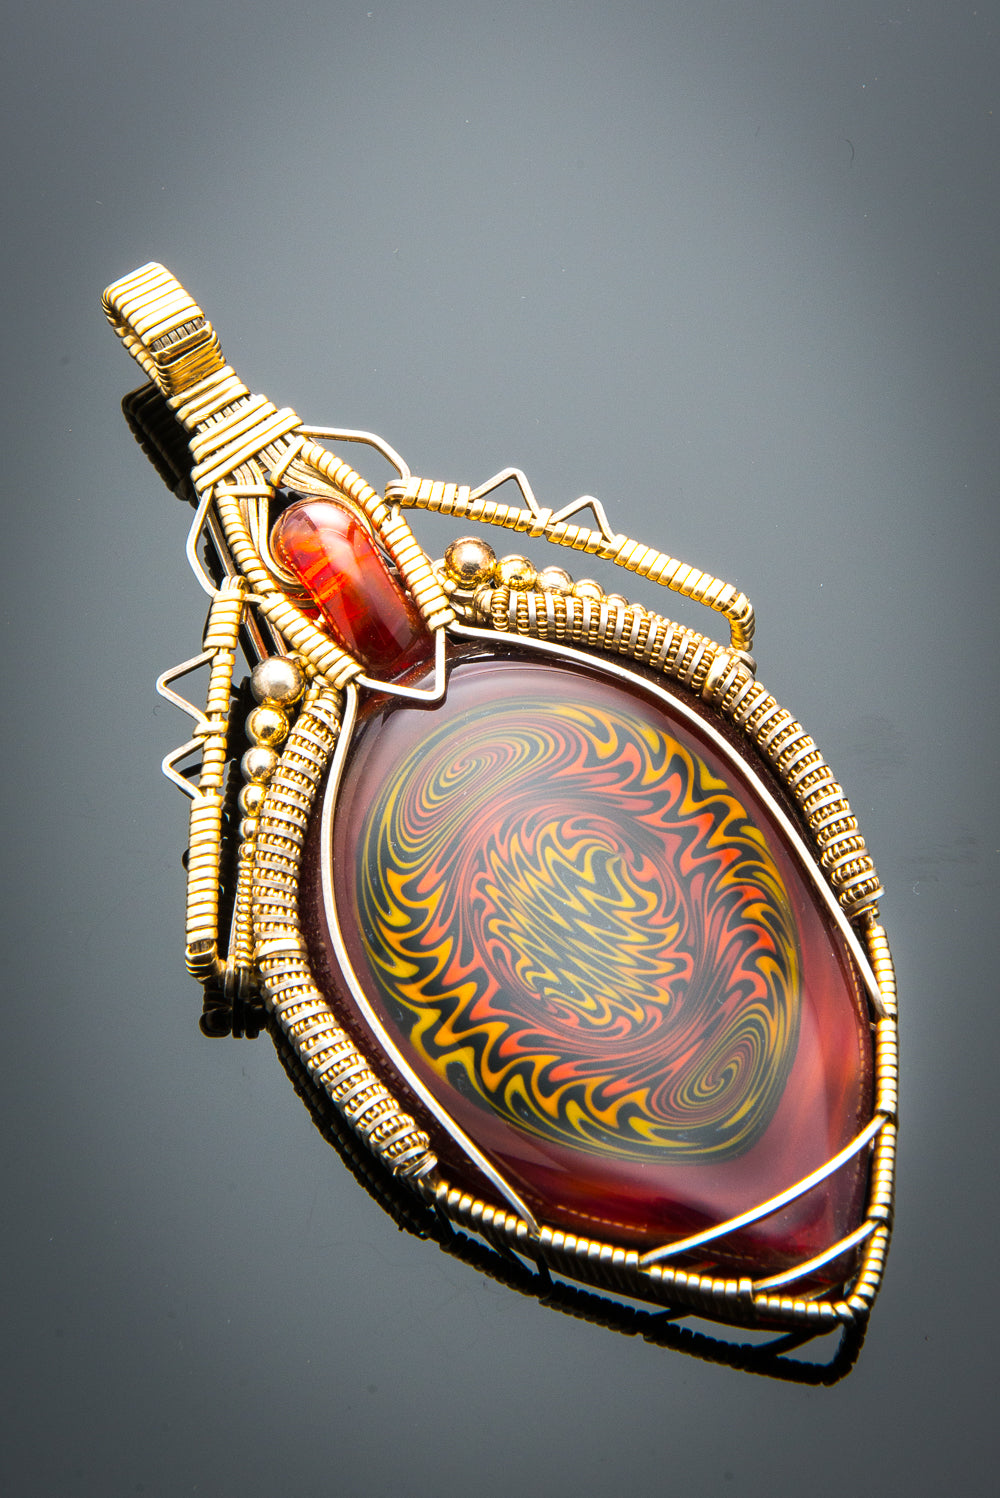 Wire Wrapped "Phoenix" Pendant Collaboration by Trikky and Tim Mayer (Wire Fire Wraps)